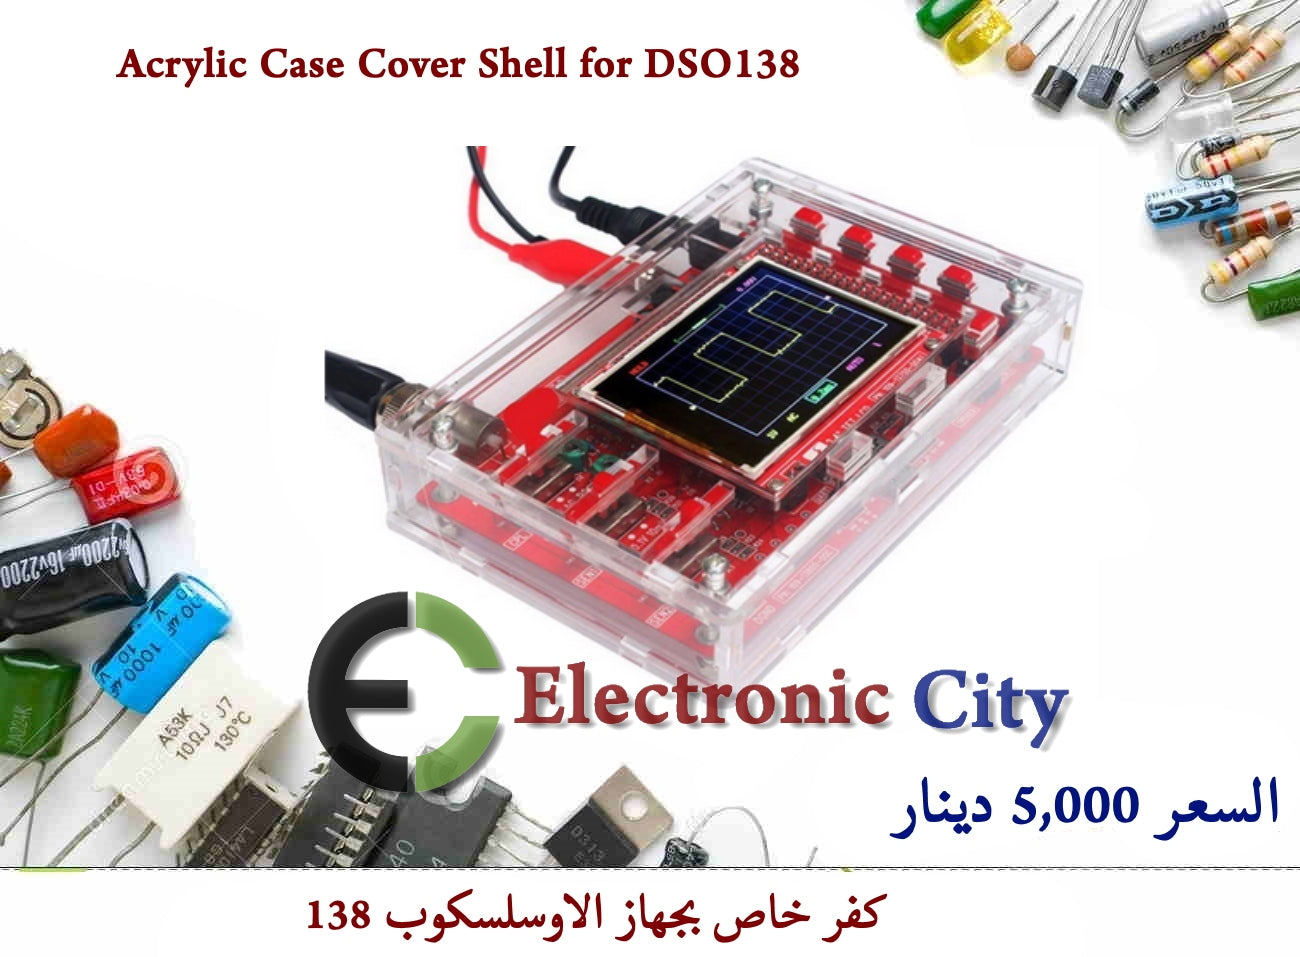 Acrylic Case Cover Shell for DSO138